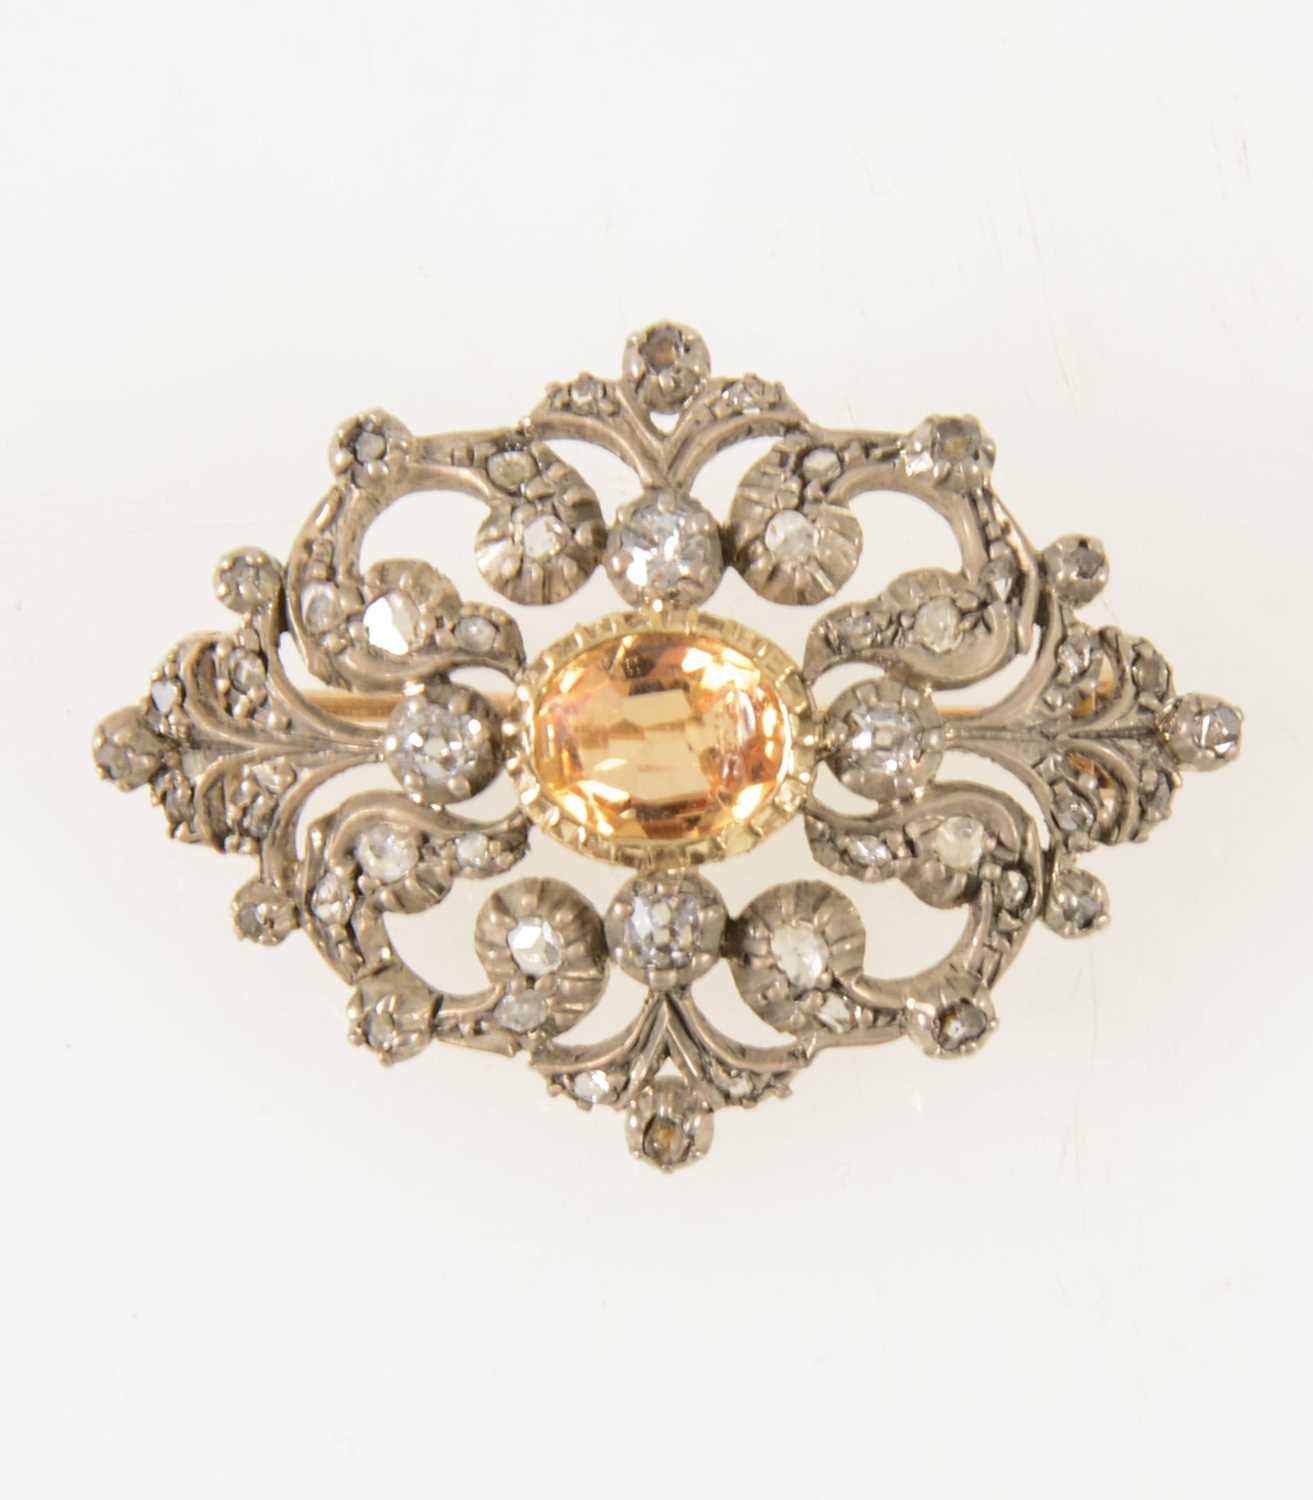 Lot 66 - A late Victorian diamond brooch with golden yellow stone to centre